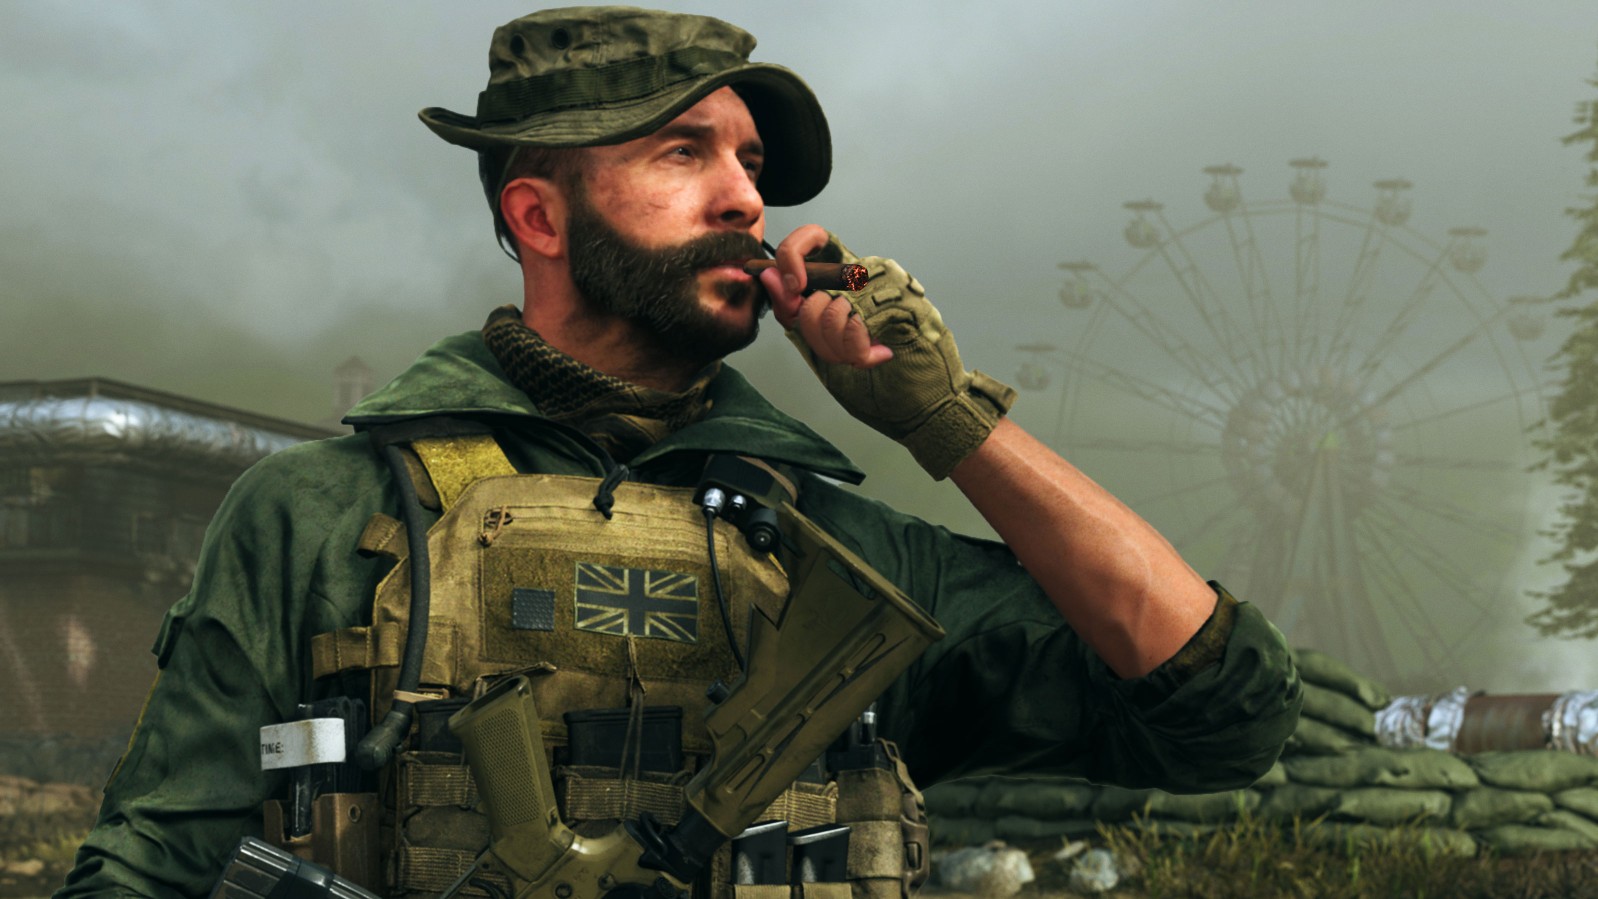  Activision confirms Call of Duty: Warzone uses 'internal anti-cheat software' as it reaches 300,000 bans to-date 